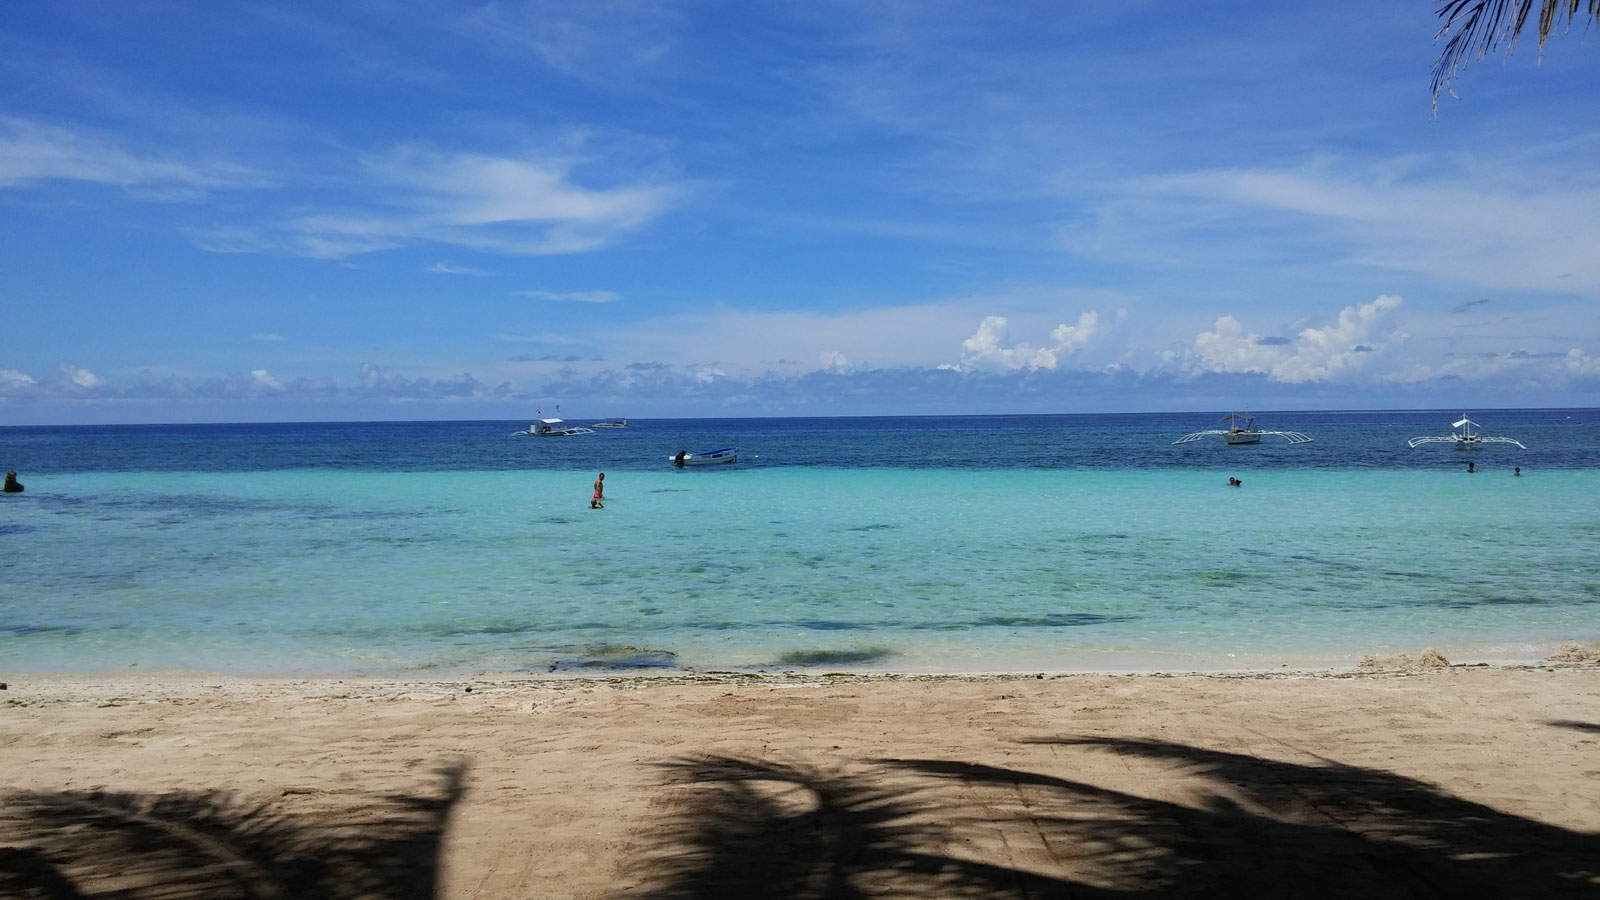 OFFICE VIEW. Mobile connectivity, modern technology and a slowly changing office culture will soon allow us to work from anywhere, including from this beach in Panglao Island, Bohol.